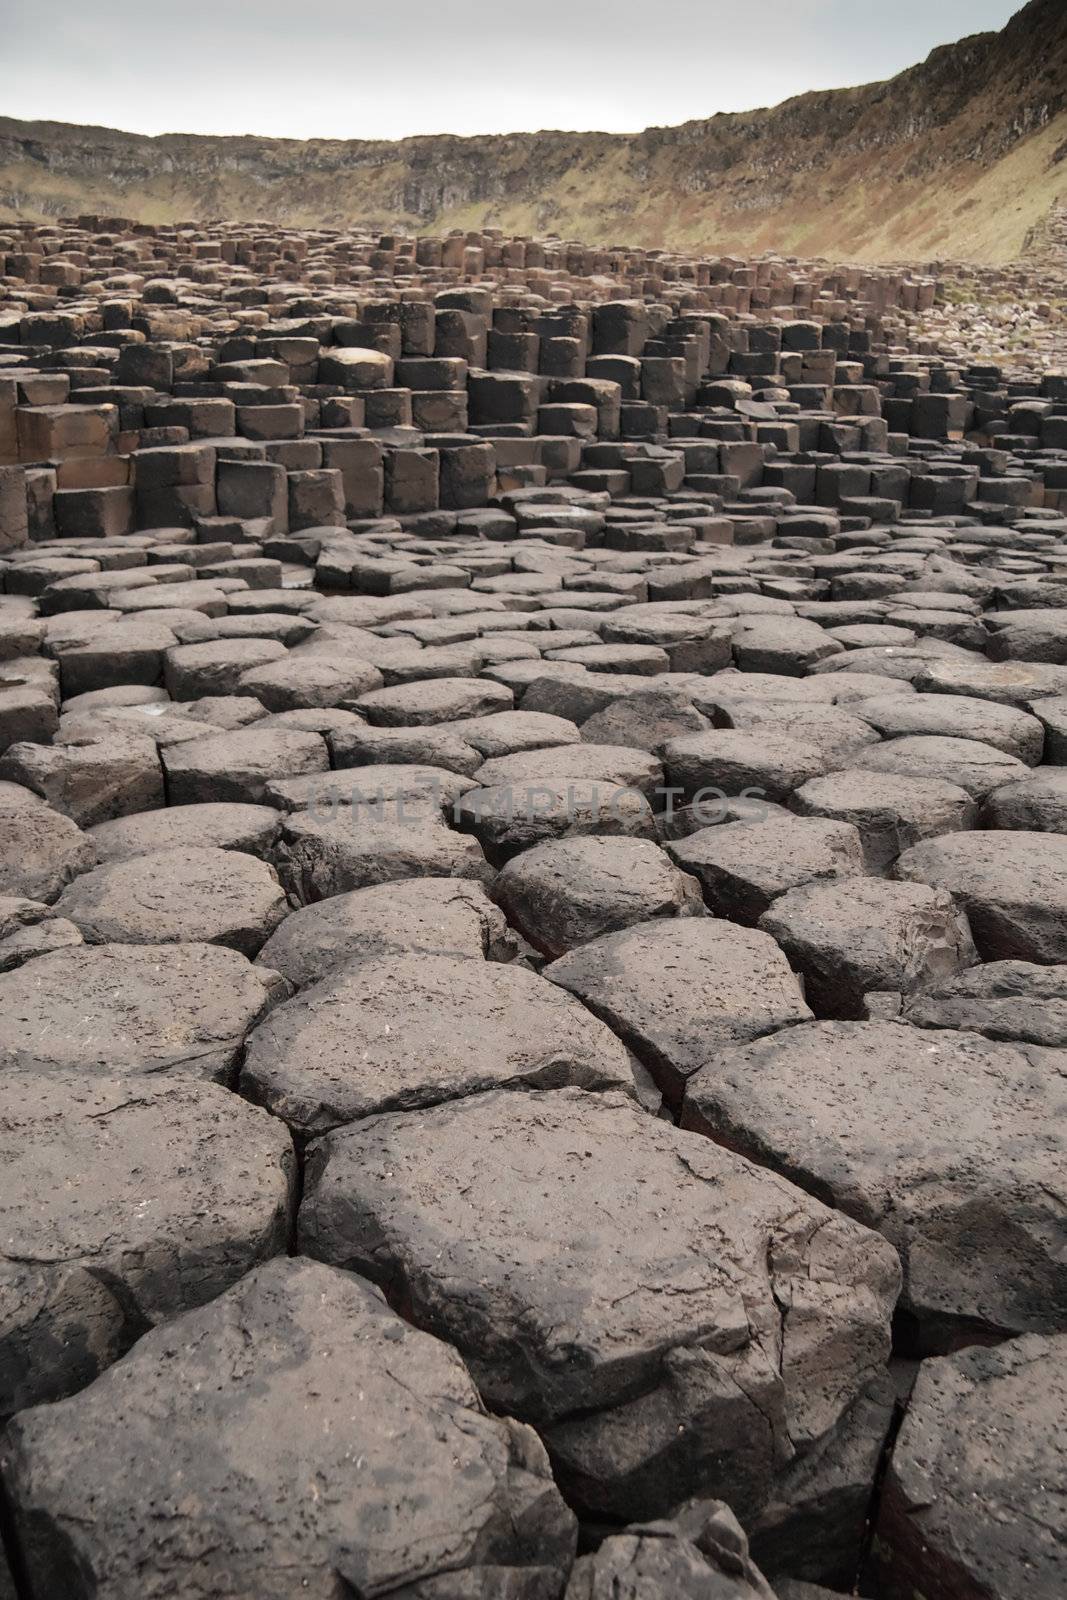 Wide view of Giant's Causeway rock formations